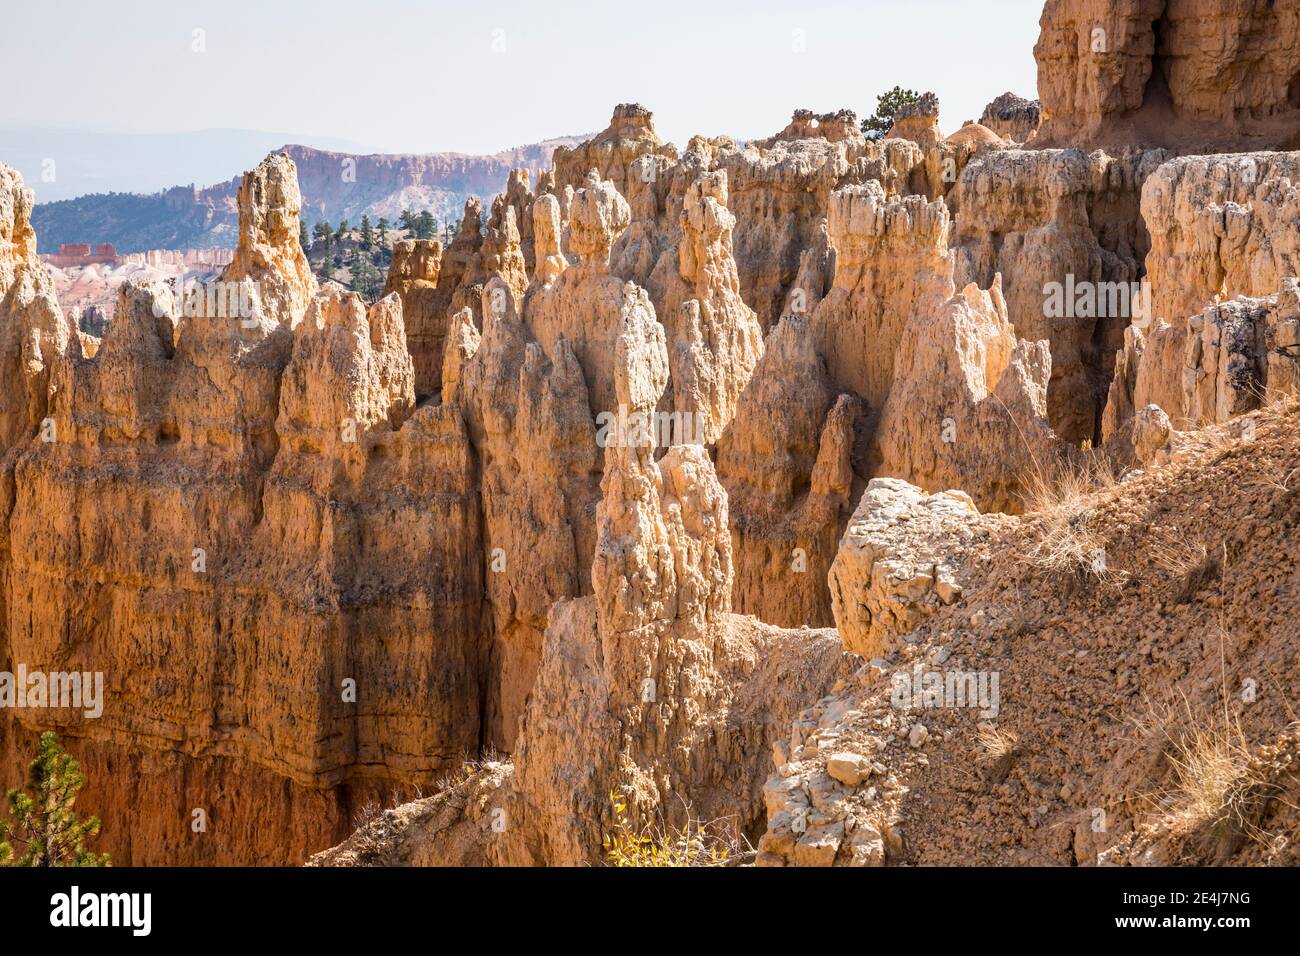 Smoke filled sky and rock structures called hoodoos in Bryce Canyon National Park, Utah, USA. Stock Photo